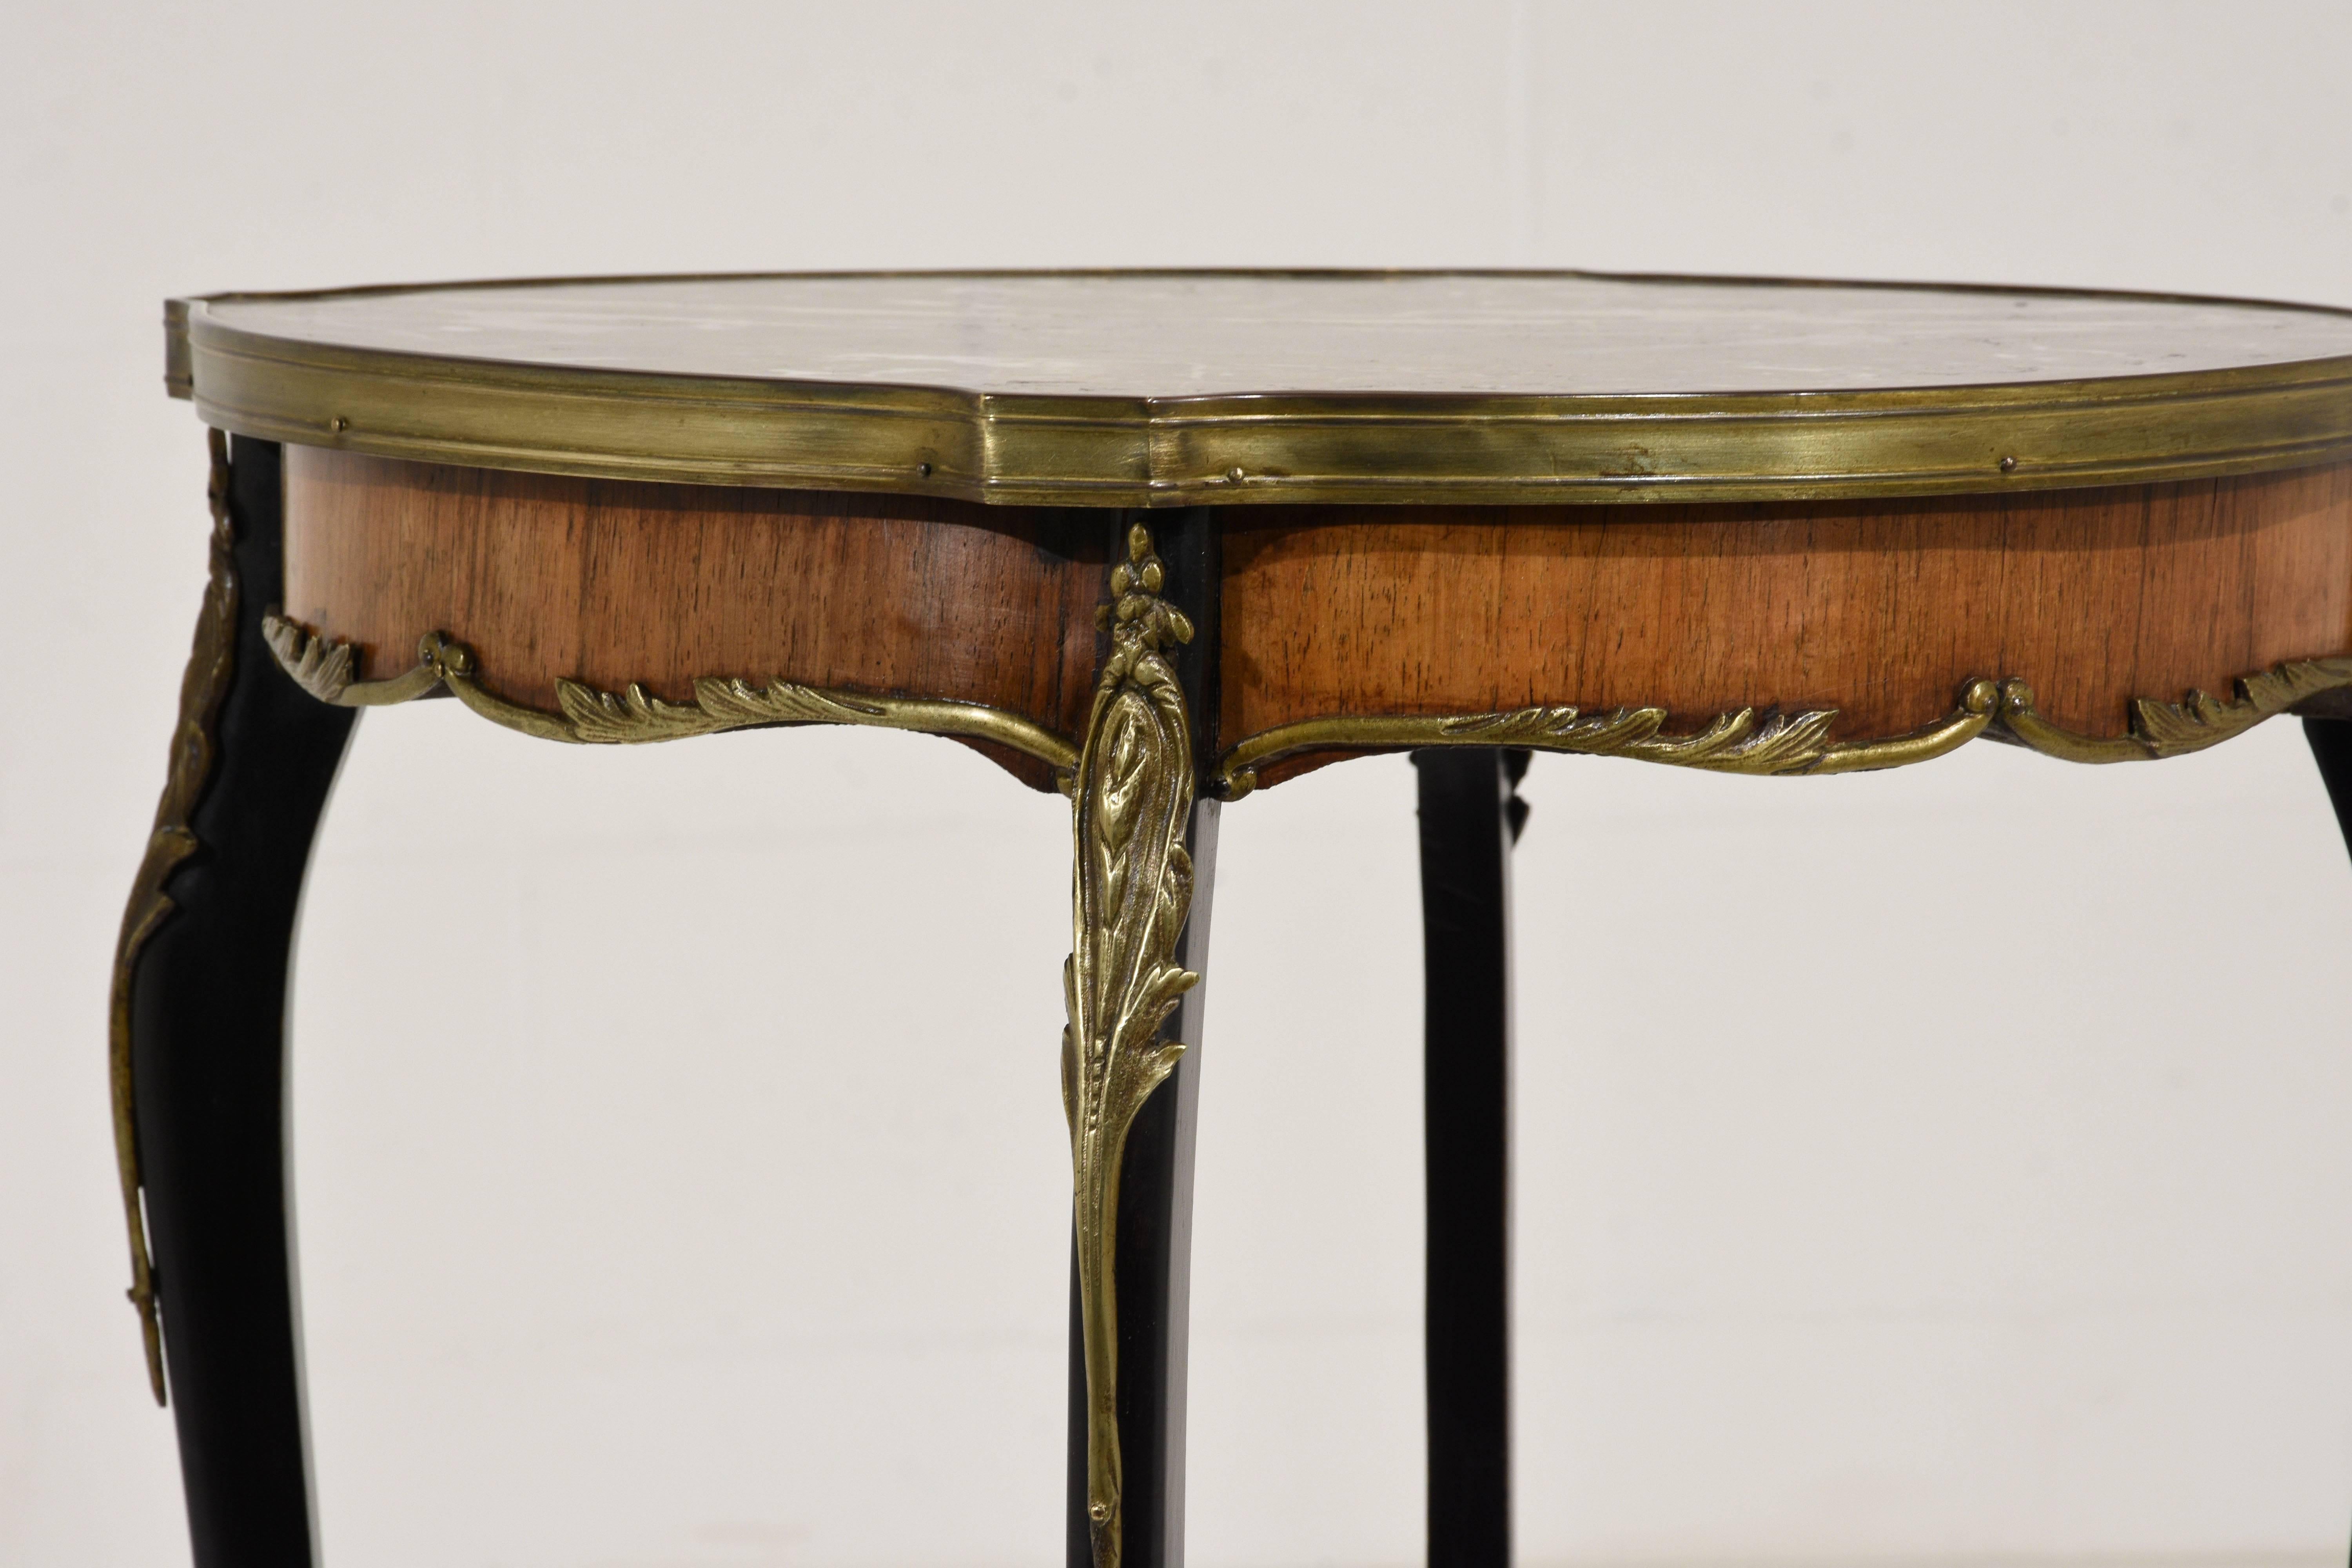 This 1900s antique French Louis XV-style side table is made of mahogany wood stained in a rich mahogany color on the edges and the open shelf. The top of the table is made from a rouge color marble with white veins and is surrounded by brass